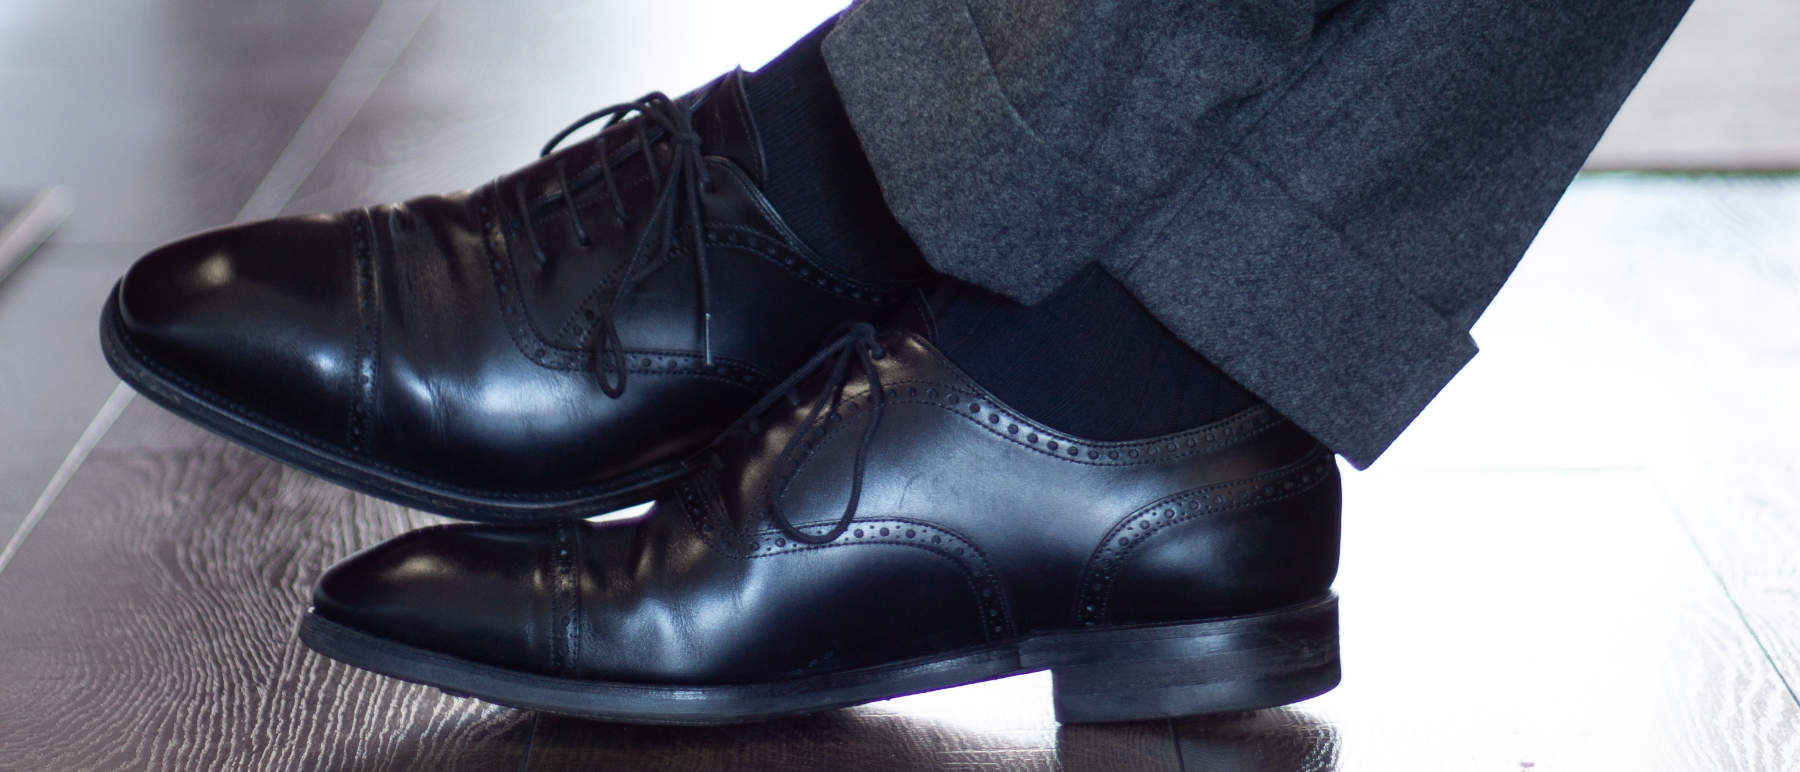 black cap toe oxford dress shoes with navy dress socks and dark grey trousers